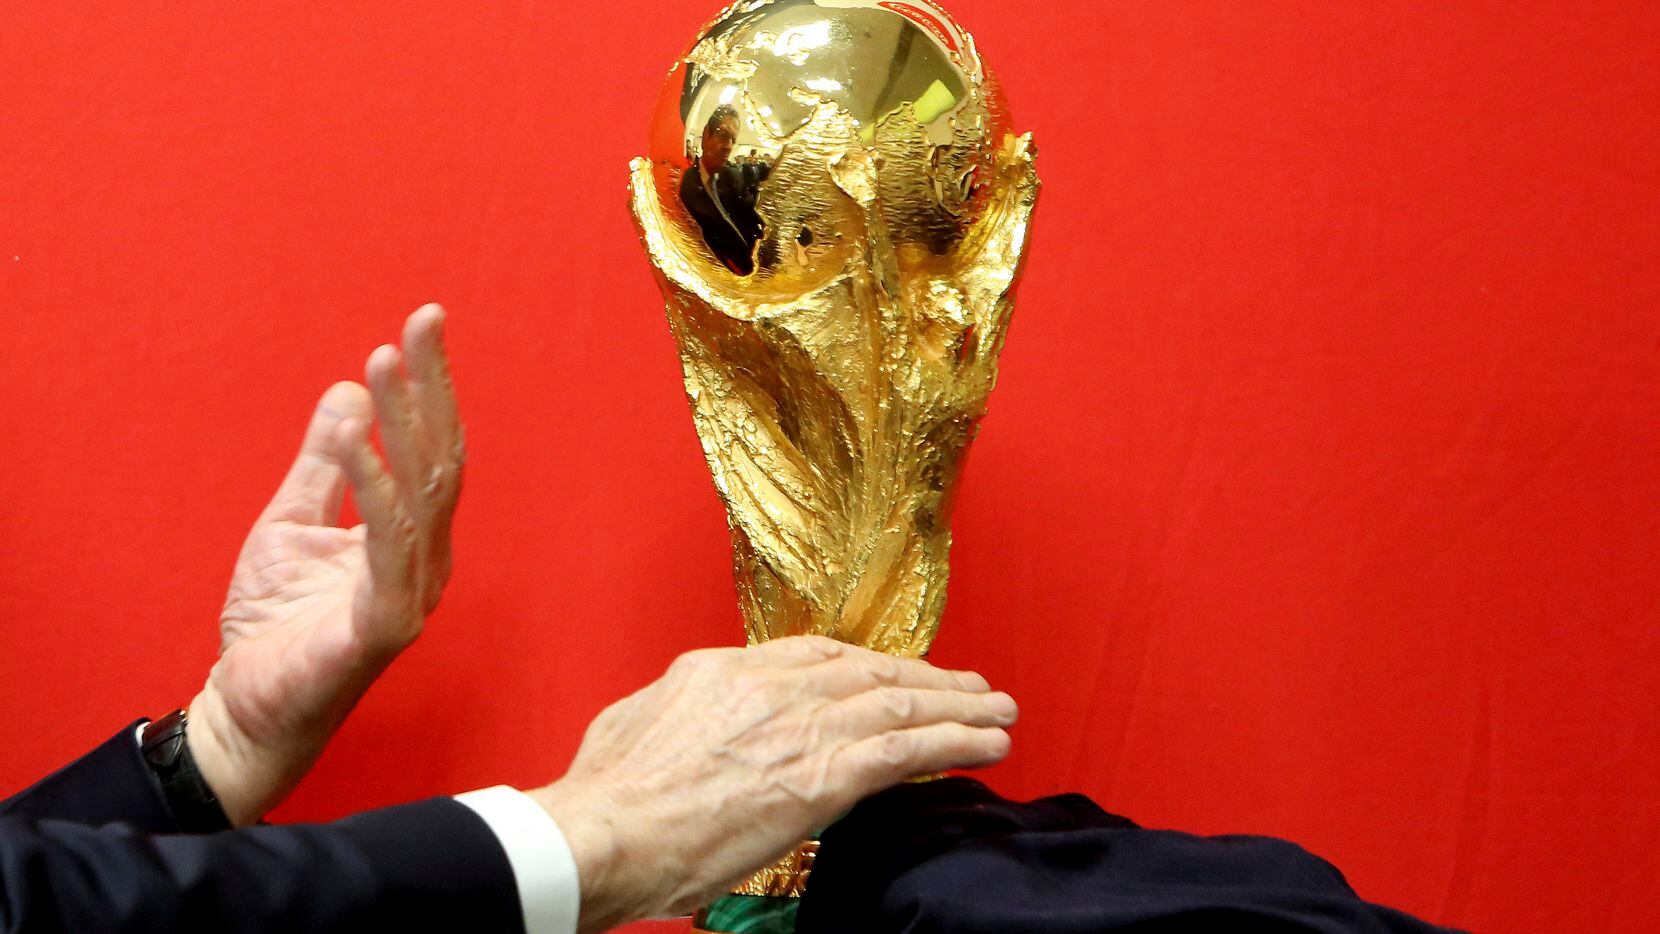 The FIFA World Cup trophy tours Cypress en route to Russia in 2018. (AP Photo/Petros Karadjias)